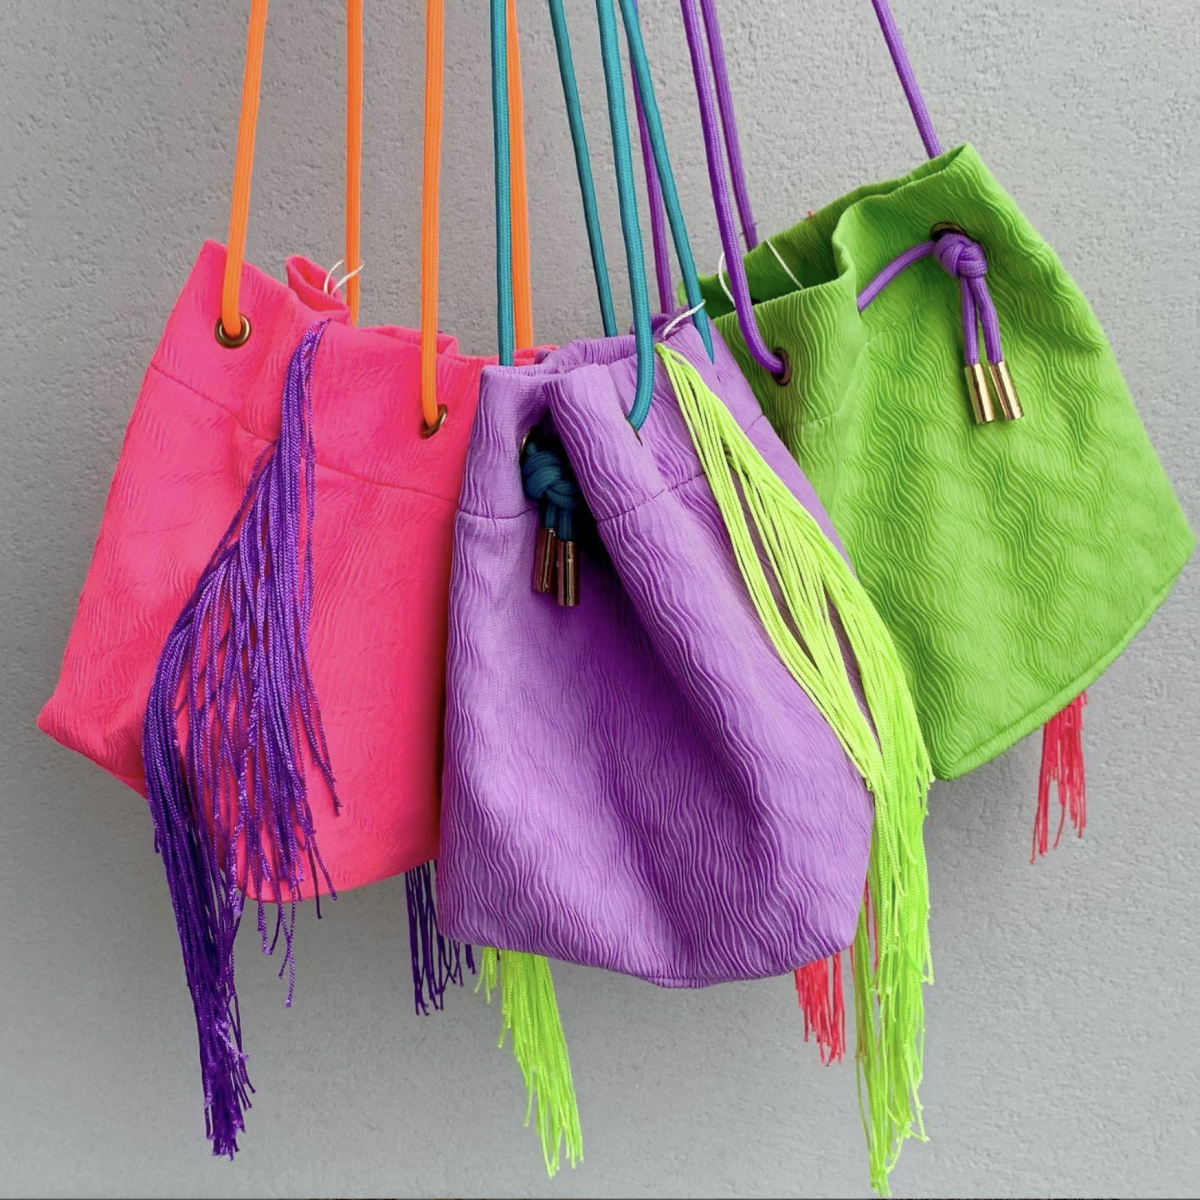 Airy Neon Bag